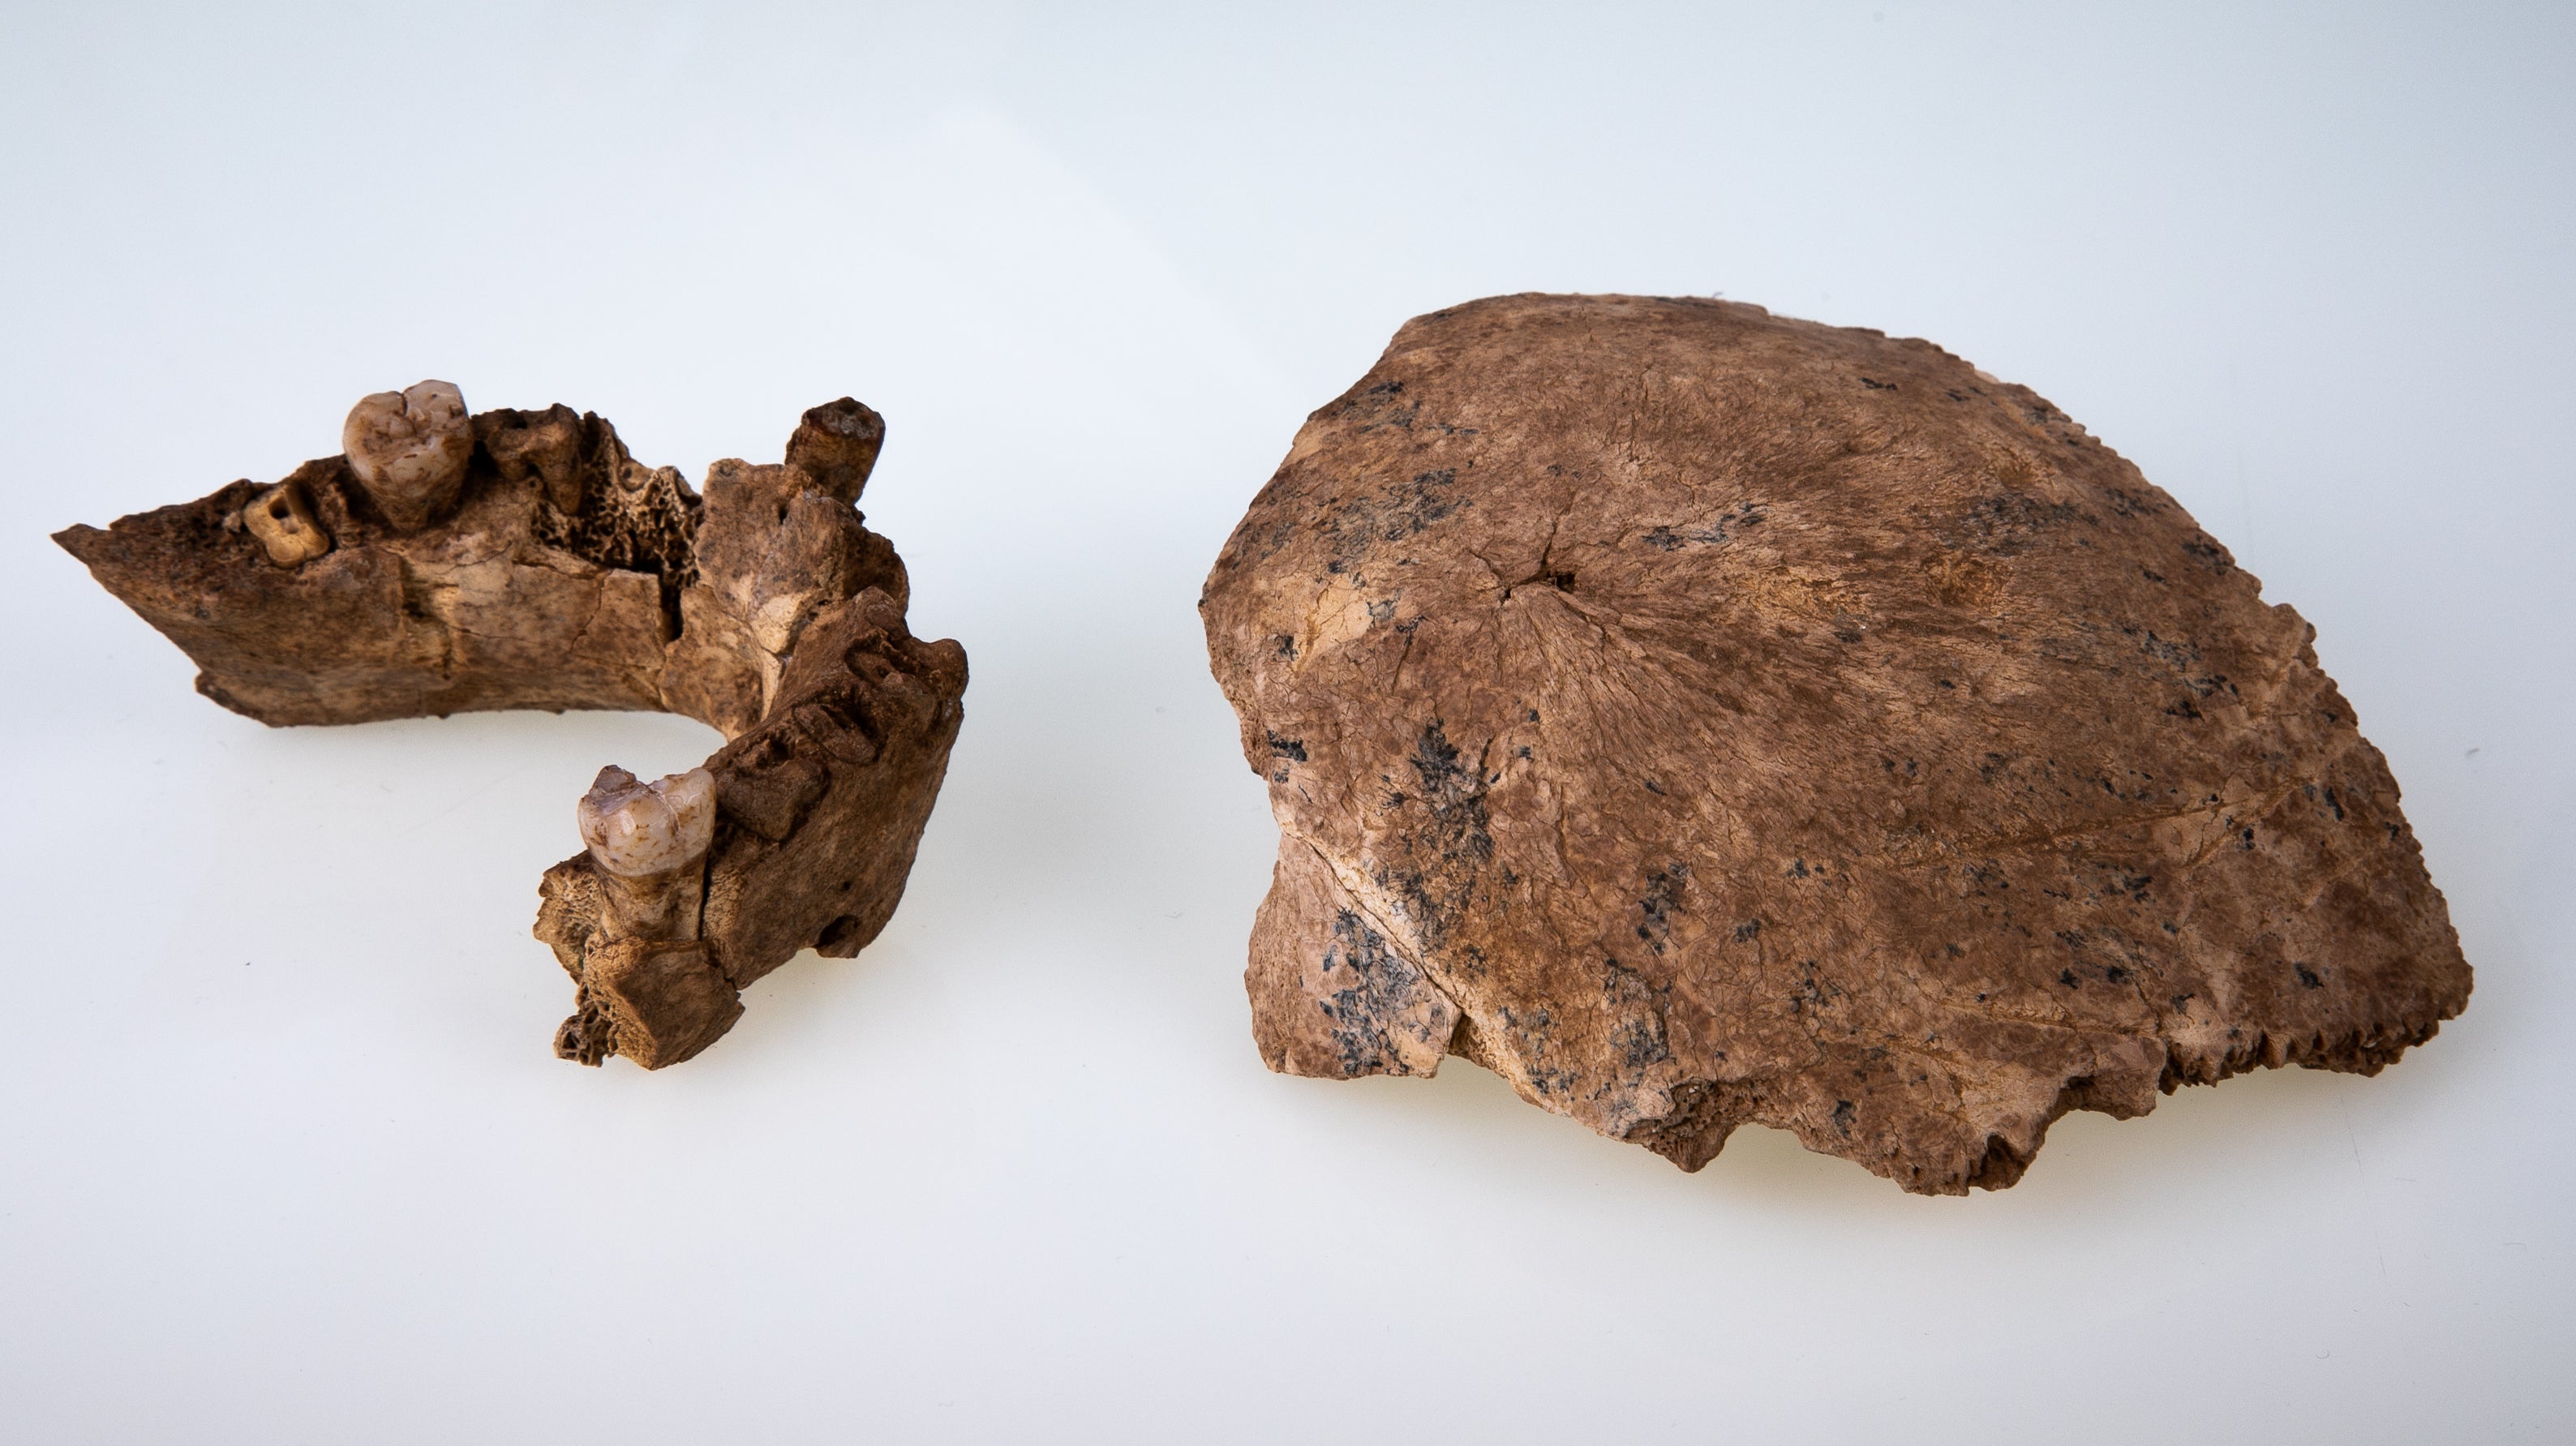 Maxilla and parietal bones of the Nesher Ramla Homo — a previously unknown prehistoric human discovered in Israel